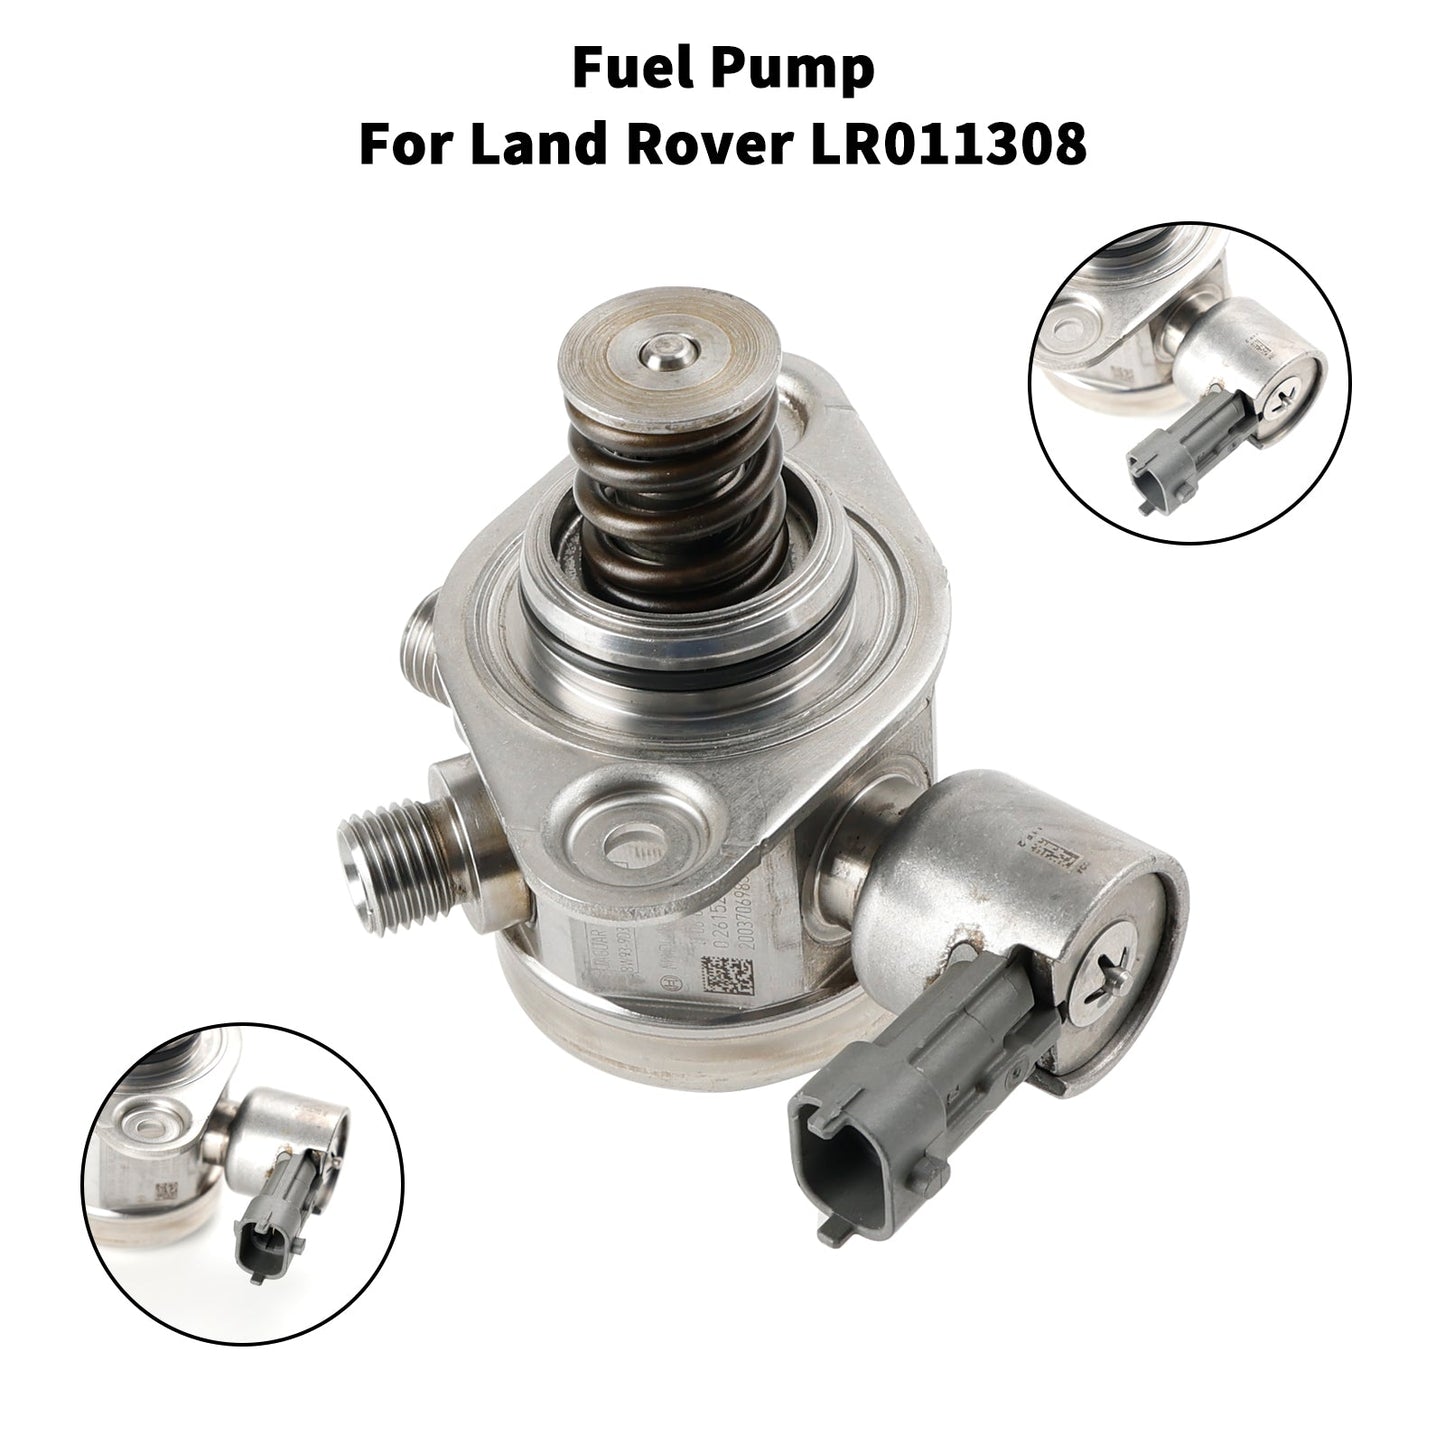 Range Rover Sport 5.0L High Pressure Fuel Pump Fit Land Rover Discovery IV